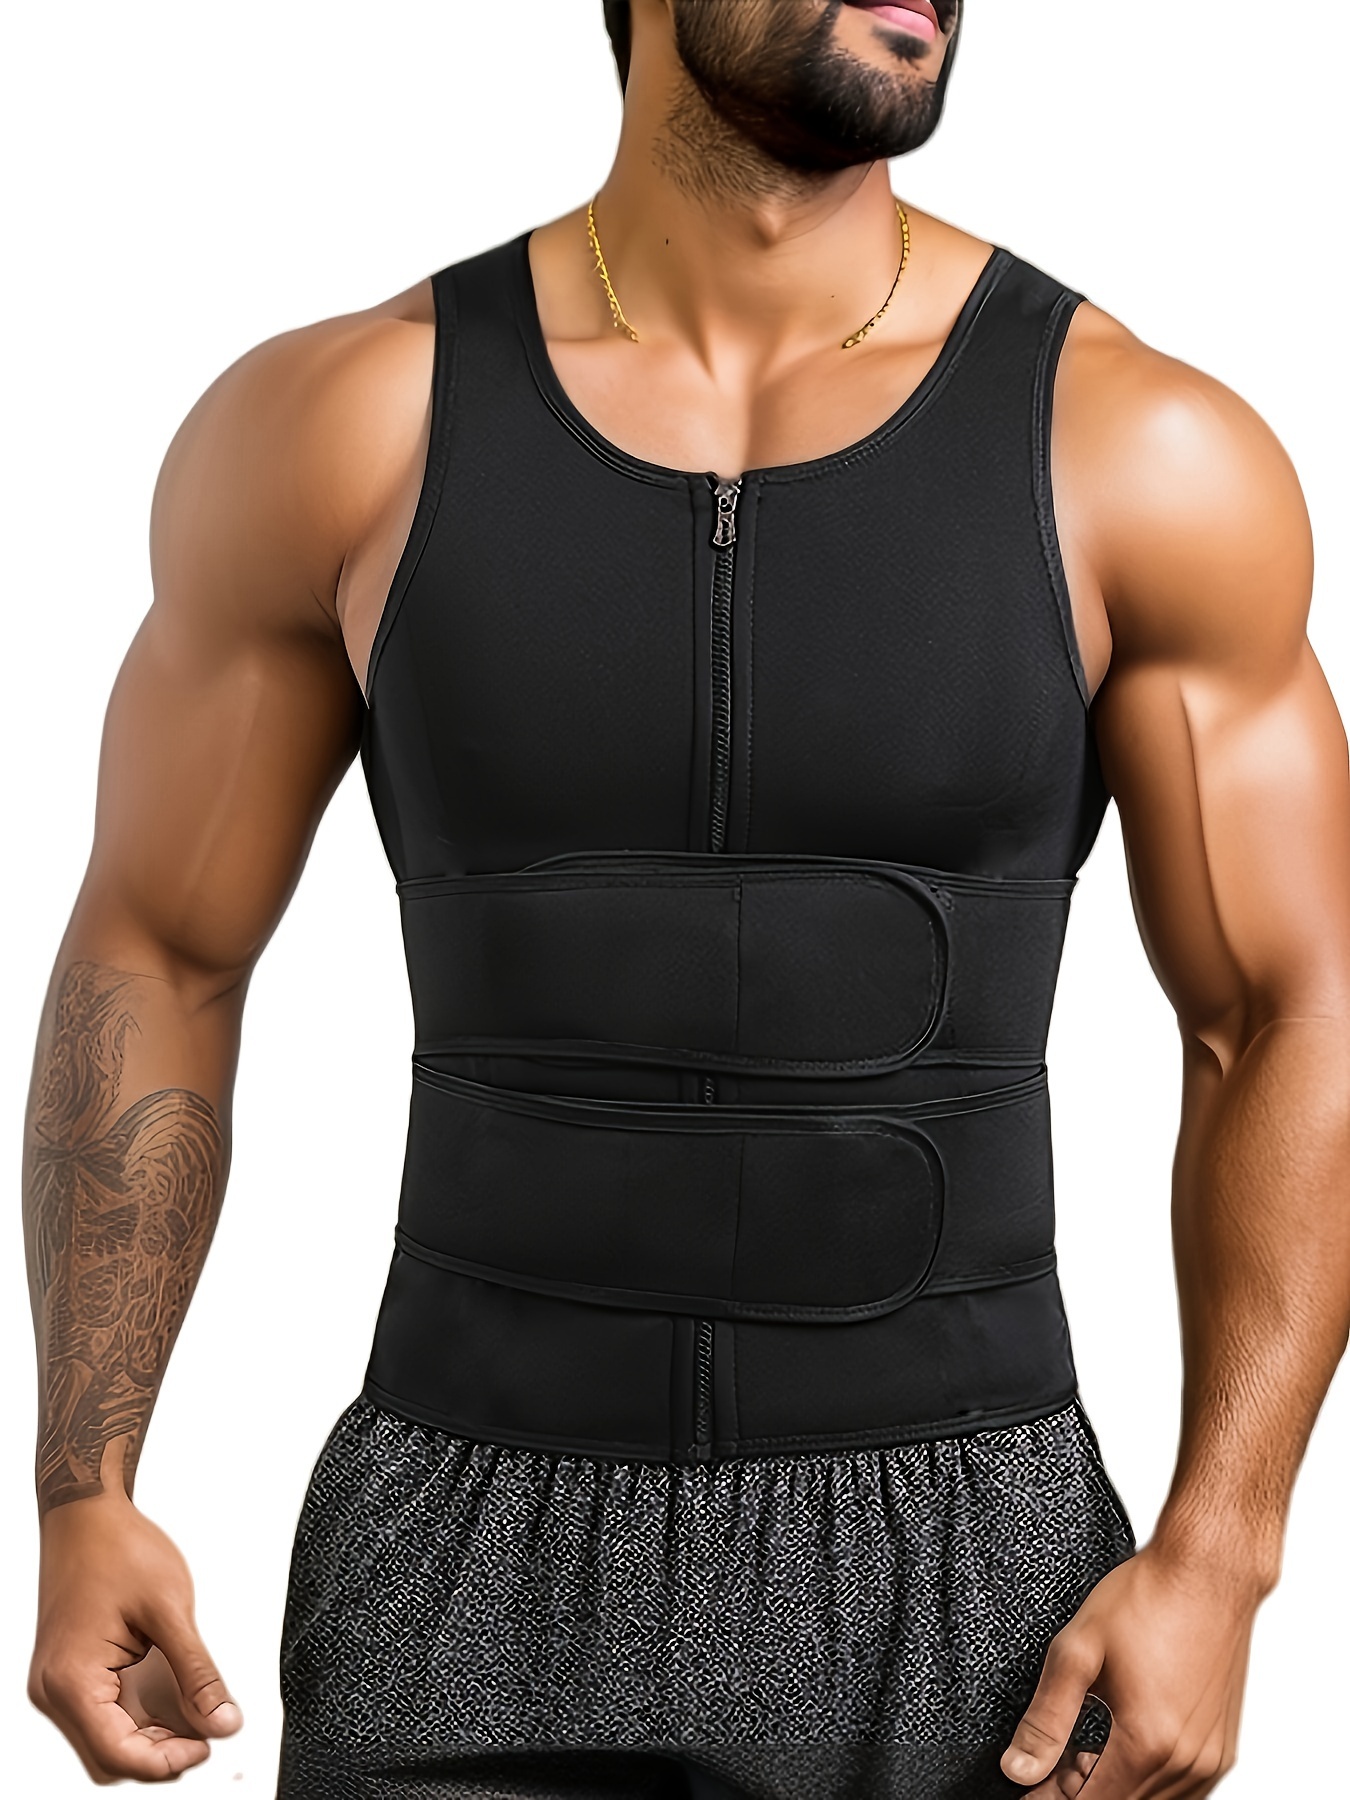 Shapewear For Men: Get A Slimmer Waist Instantly With This Double Belt Vest!